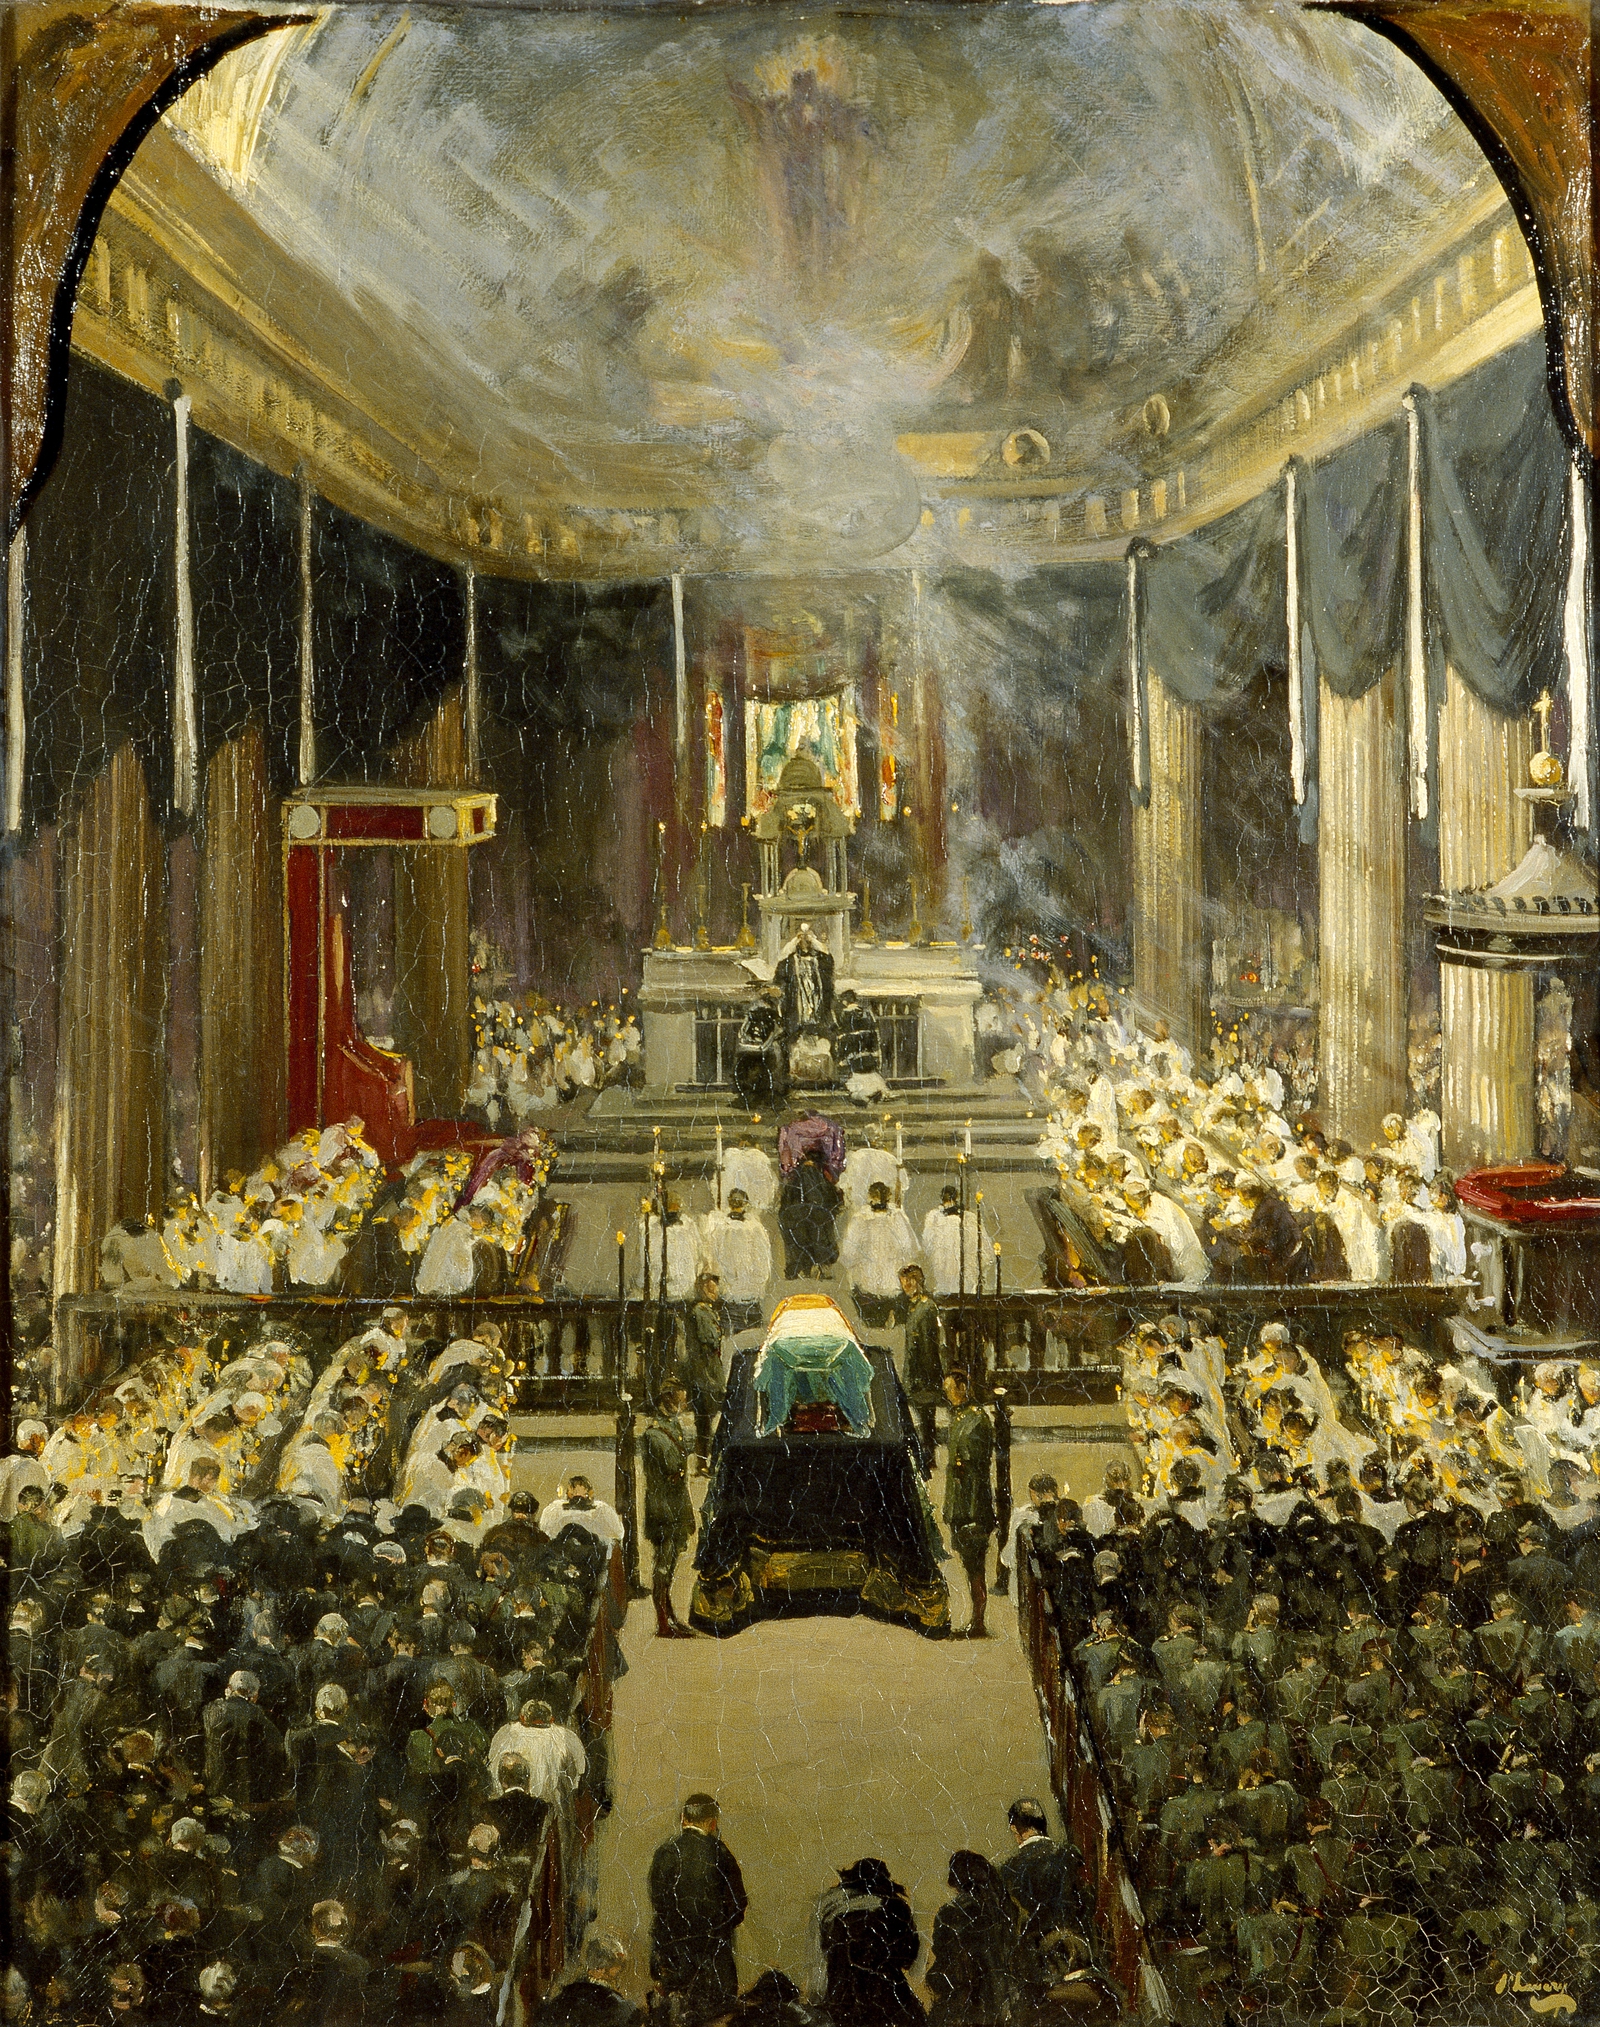 Image - Lavery's depiction of the state funeral 'Pro-Cathedral Dublin 1922' (Pic: Collection and image © Hugh Lane Gallery)